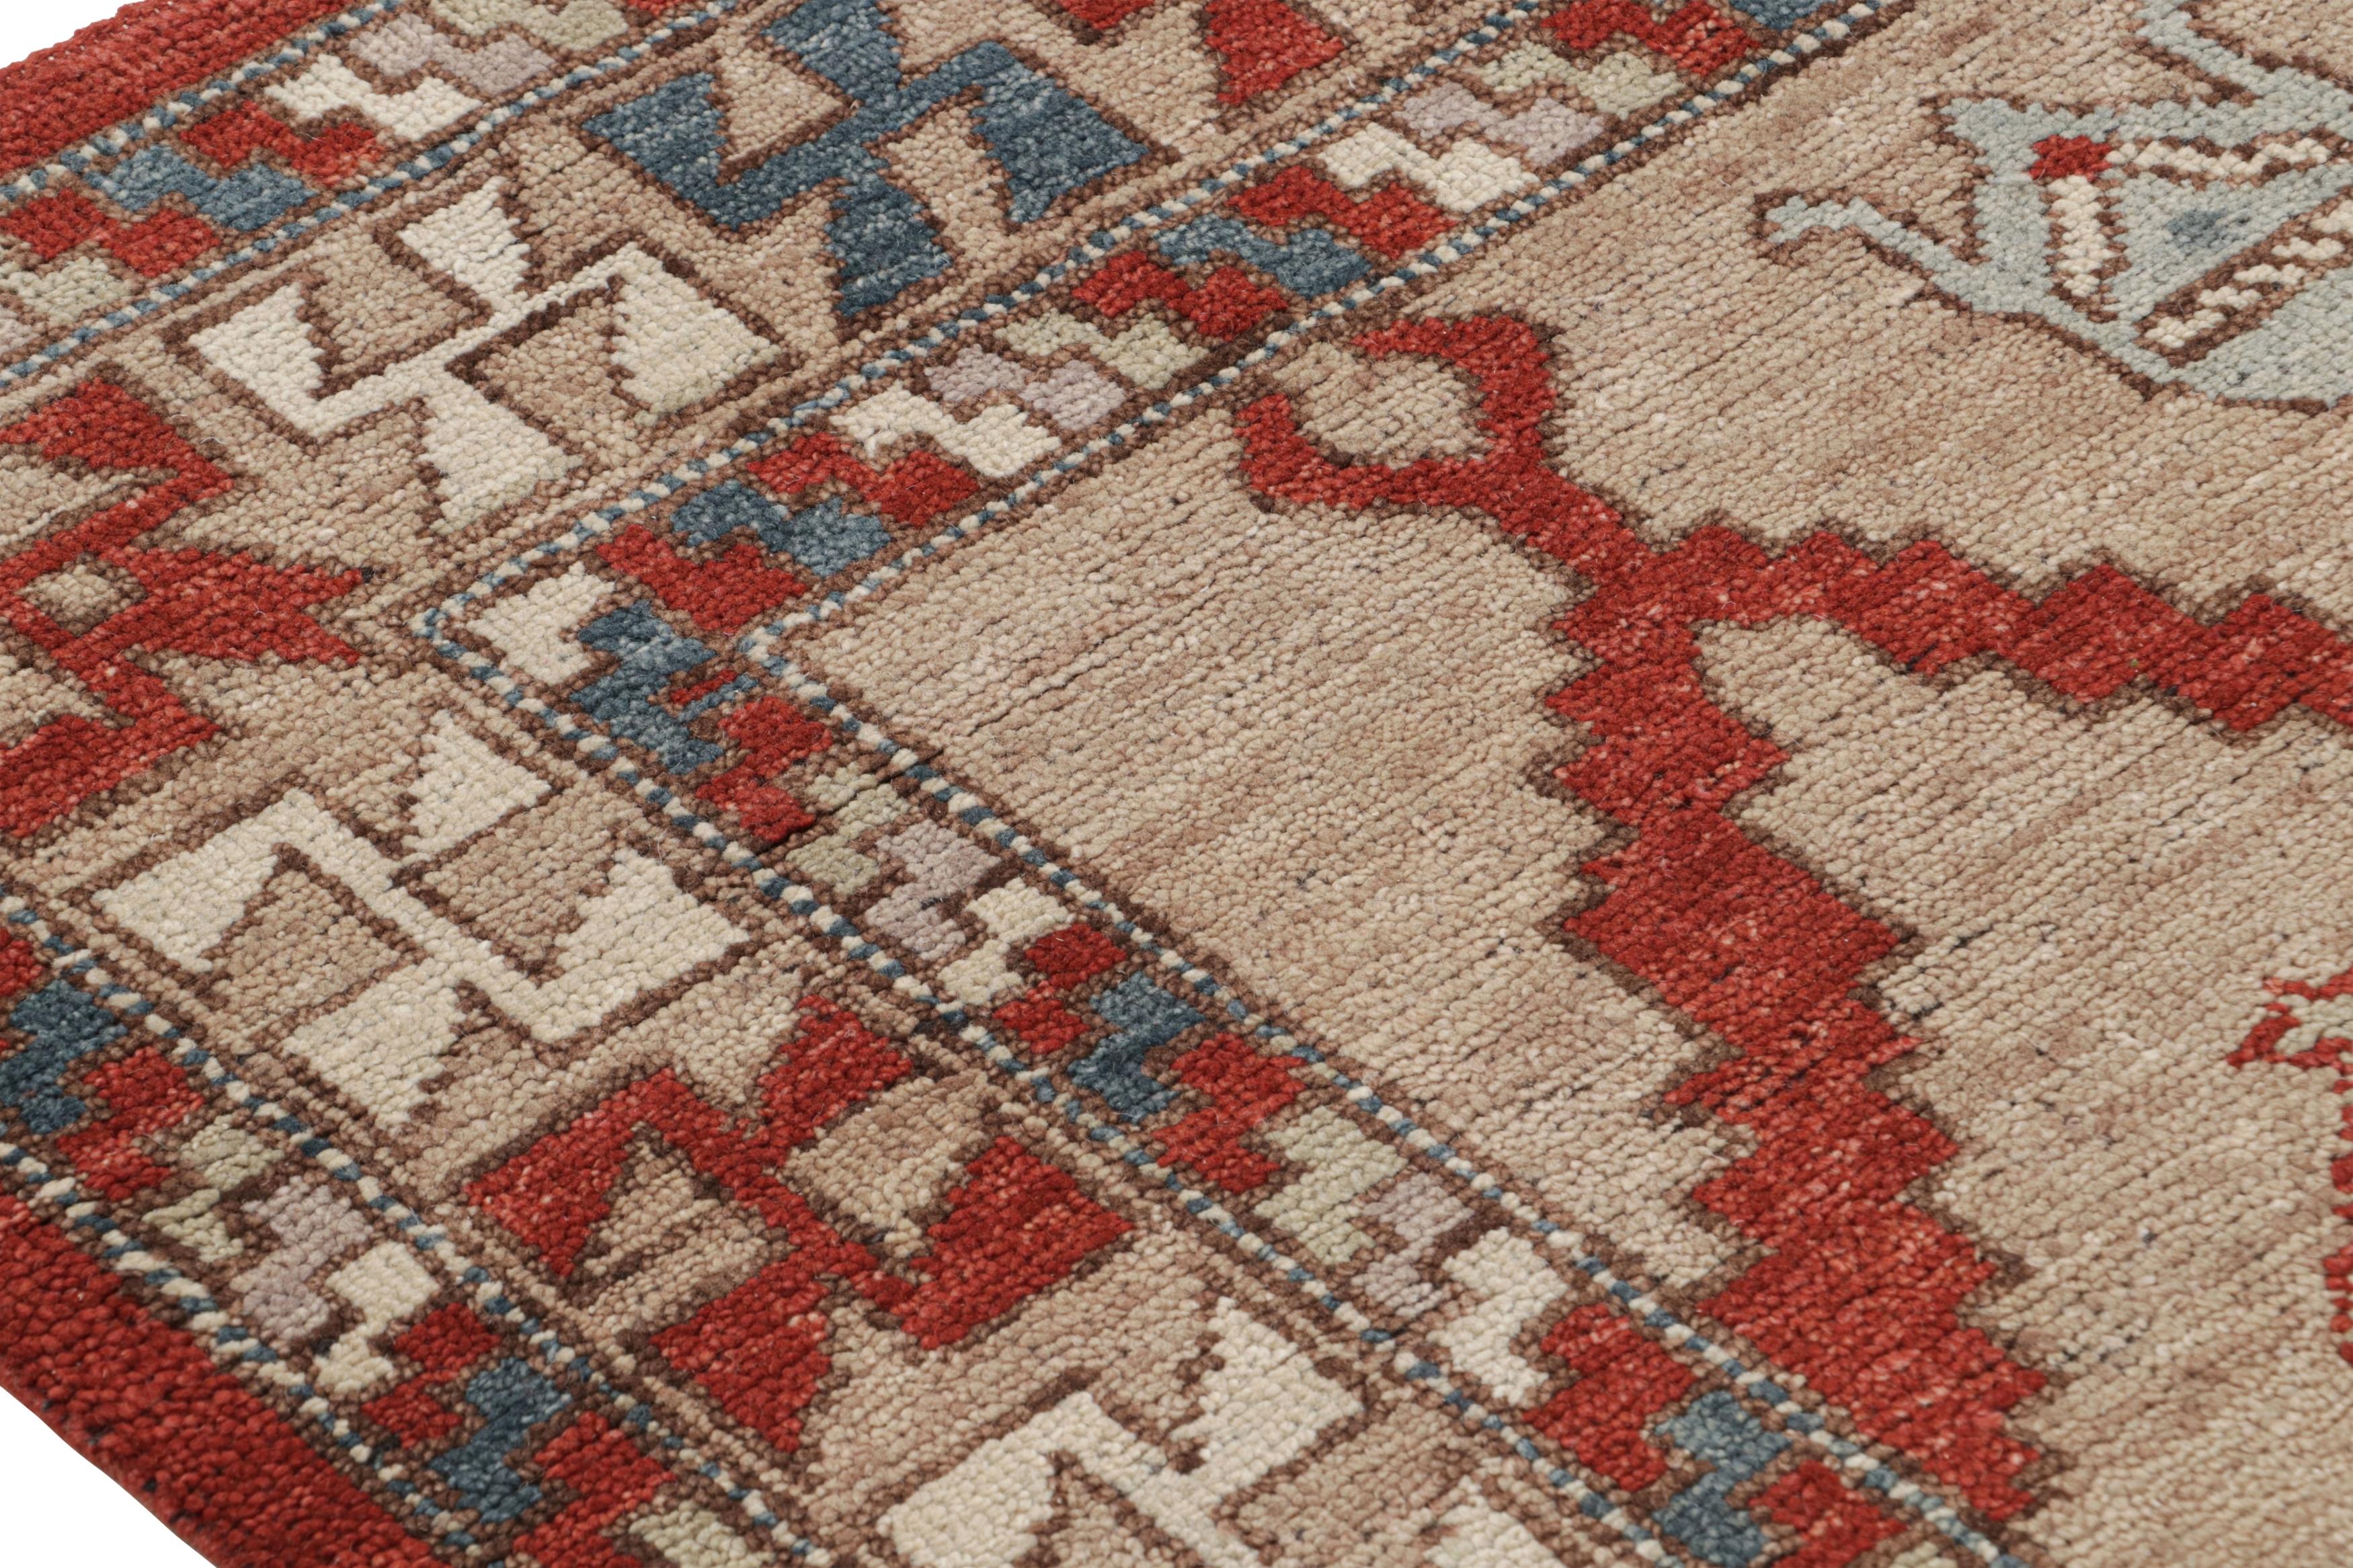 Indian Rug & Kilim’s Tribal Style Rug in Red and Beige-Brown All Over Geometric Pattern For Sale